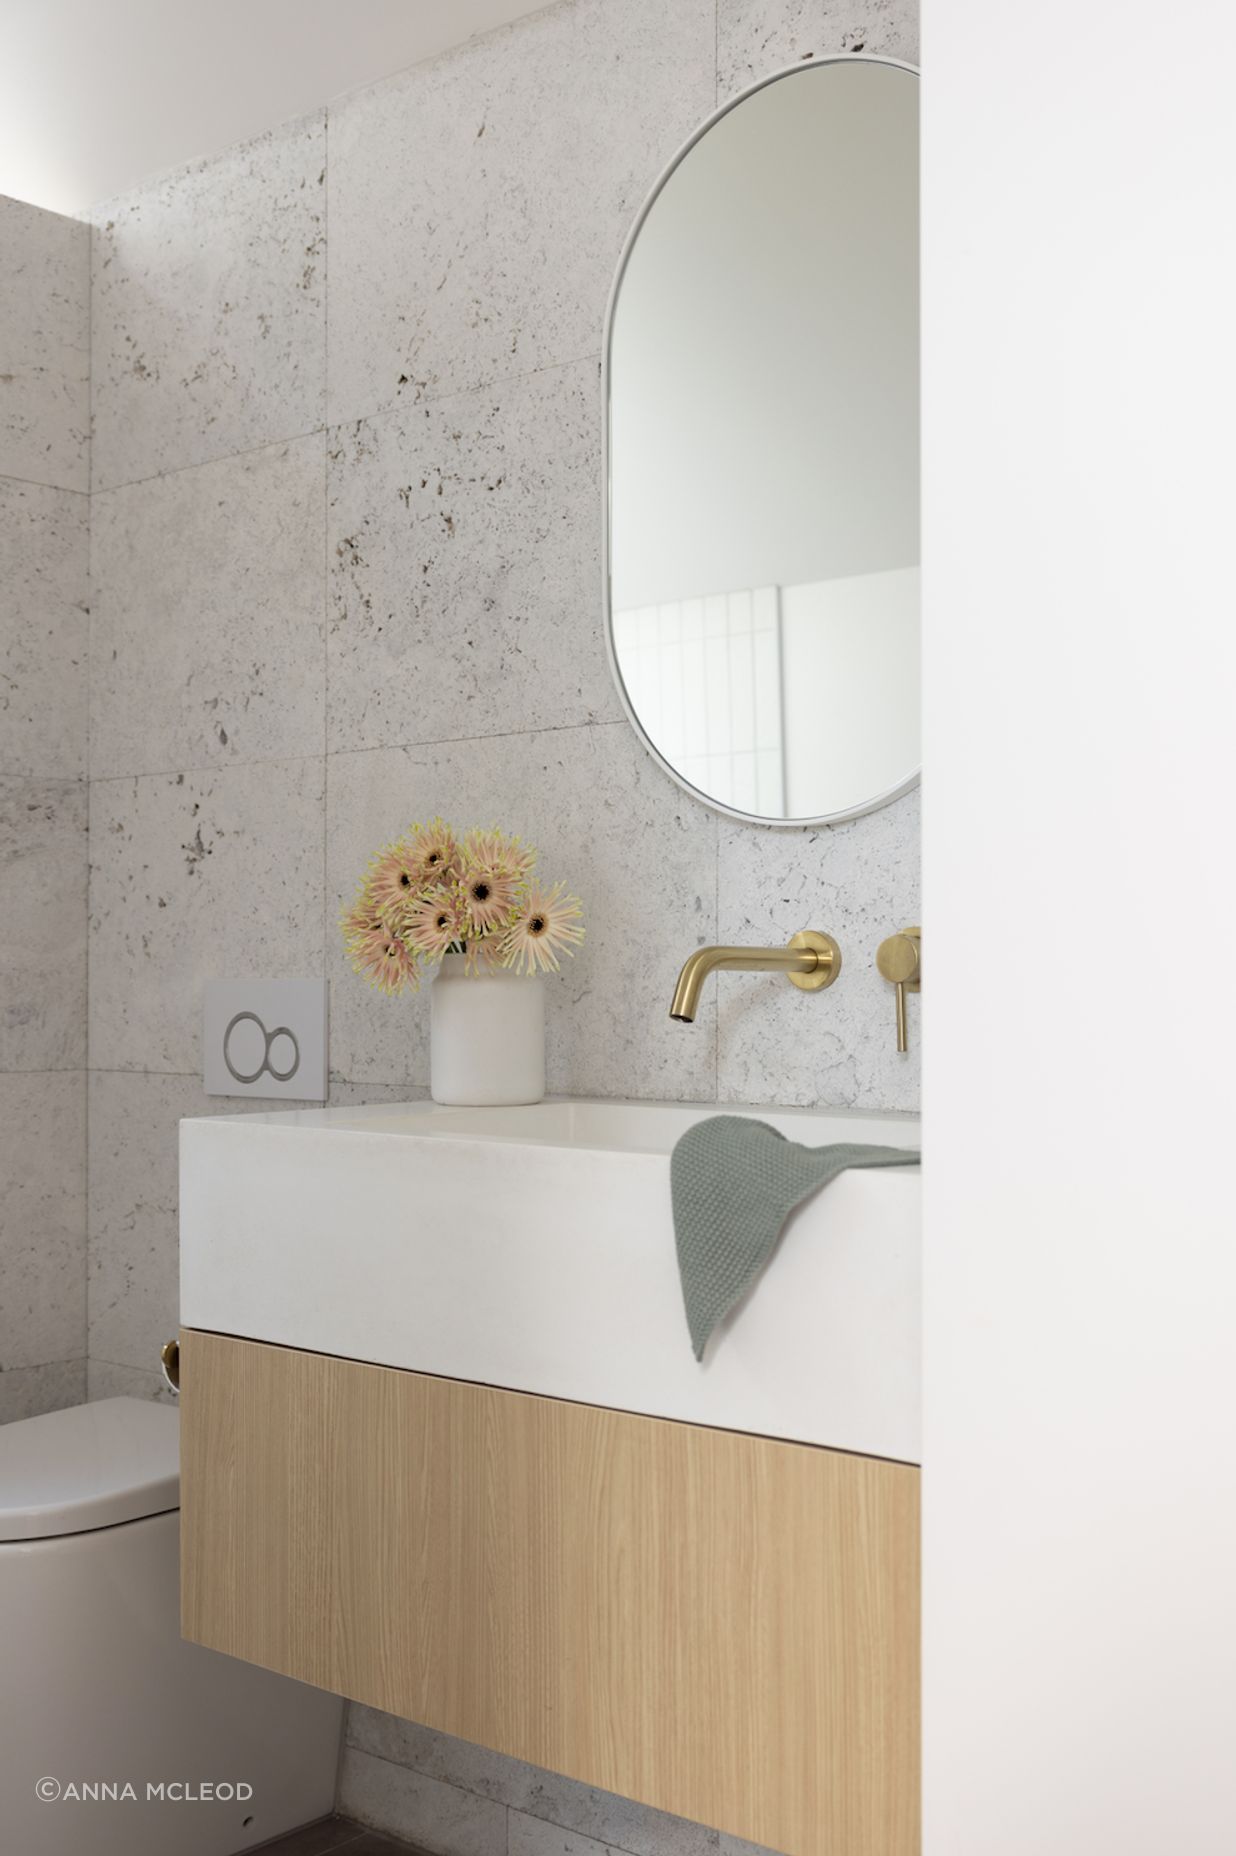 Silver travertine tiles from Artedomus and RAW Concrete basin